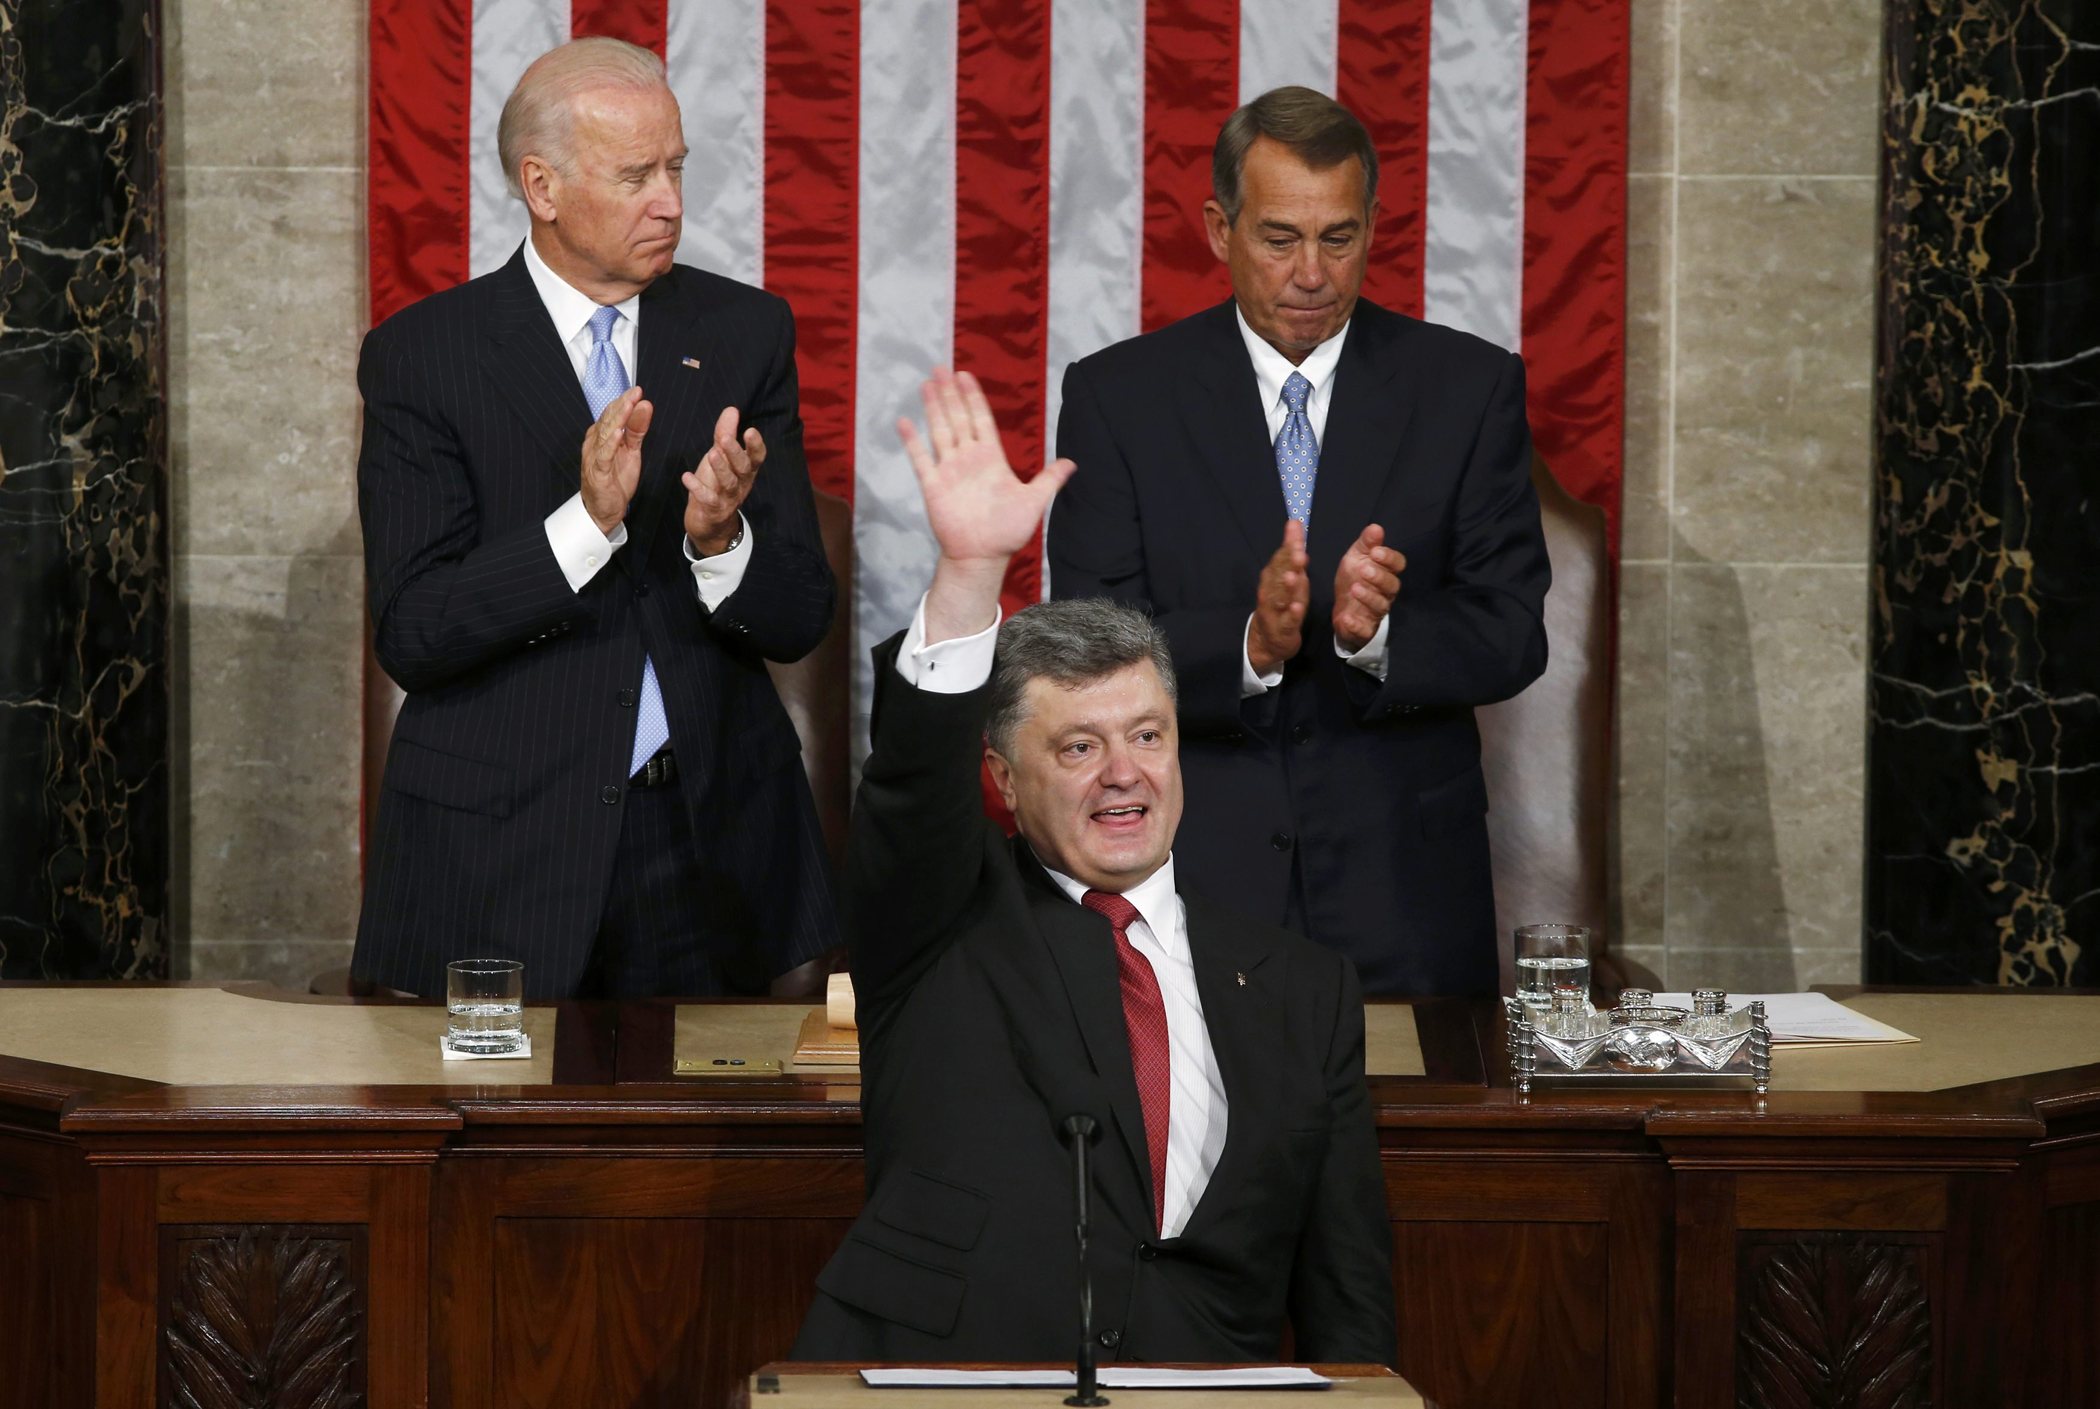 Ukraine President Petro Poroshenko acknowledges applause after addressing a joint meeting of Congress in the U.S. Capitol in Washington, Sept. 18, 2014.